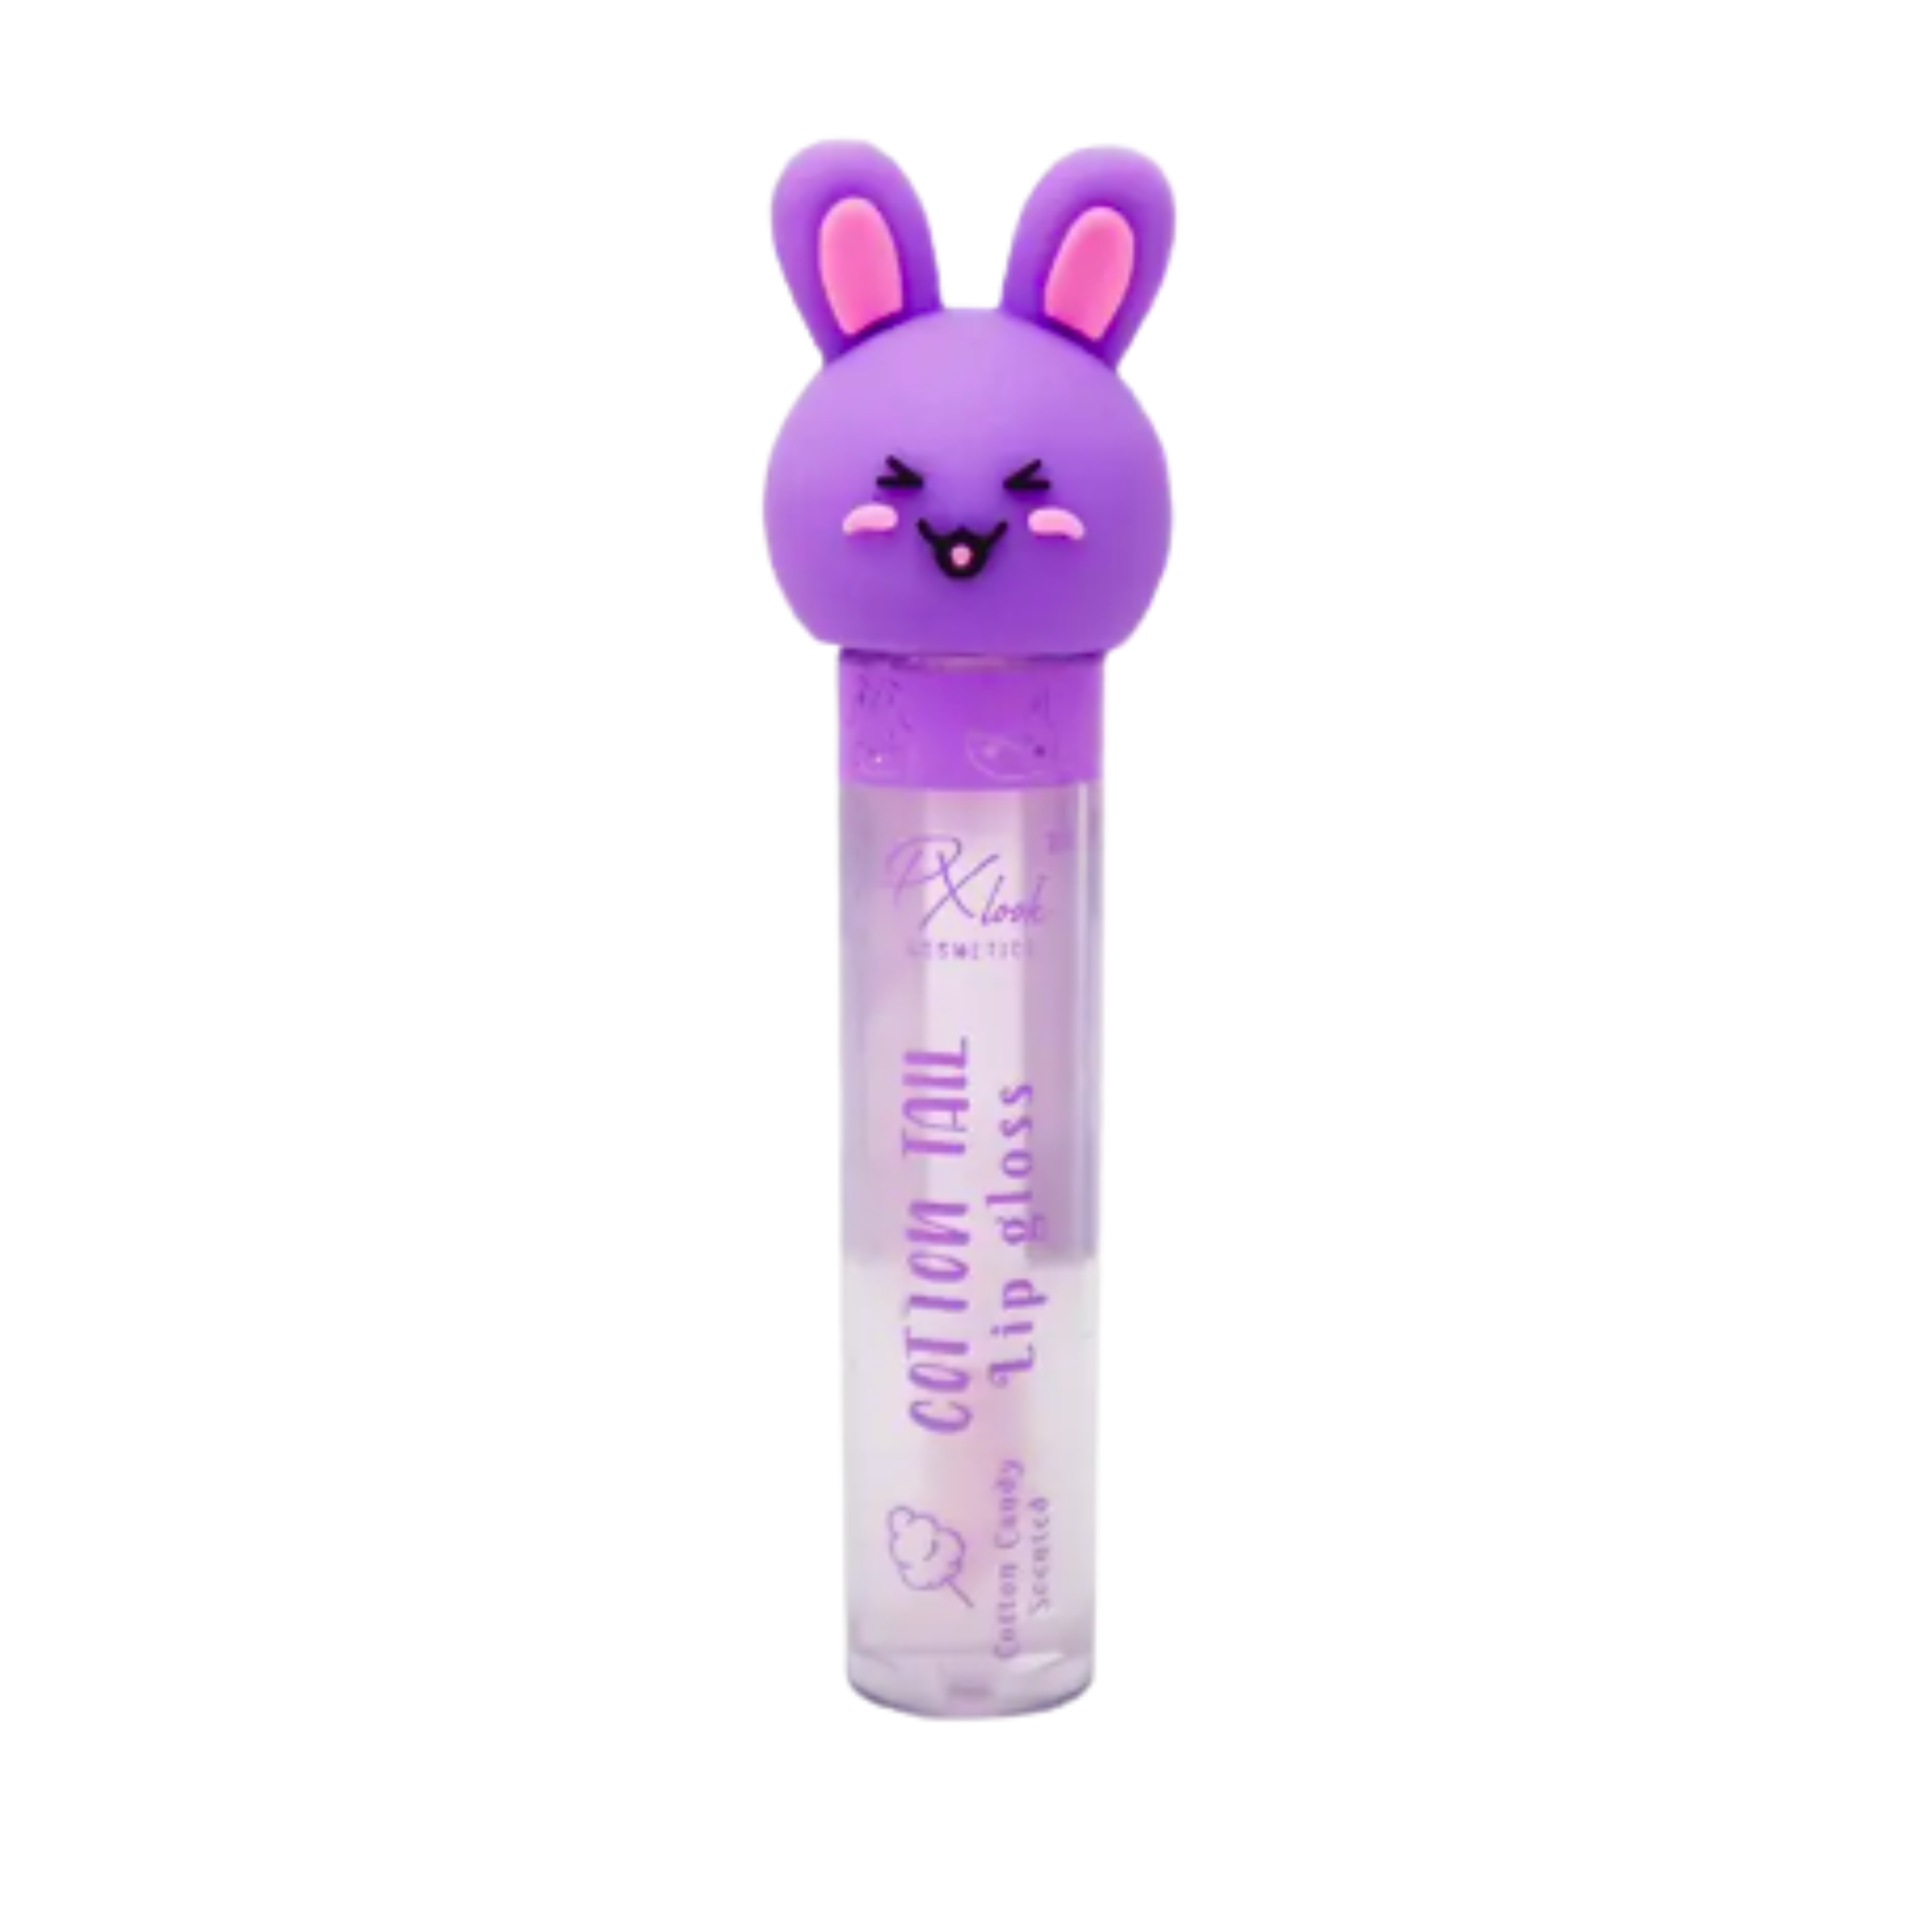 LIP GLOSS COTTON TAIL PX LOOK